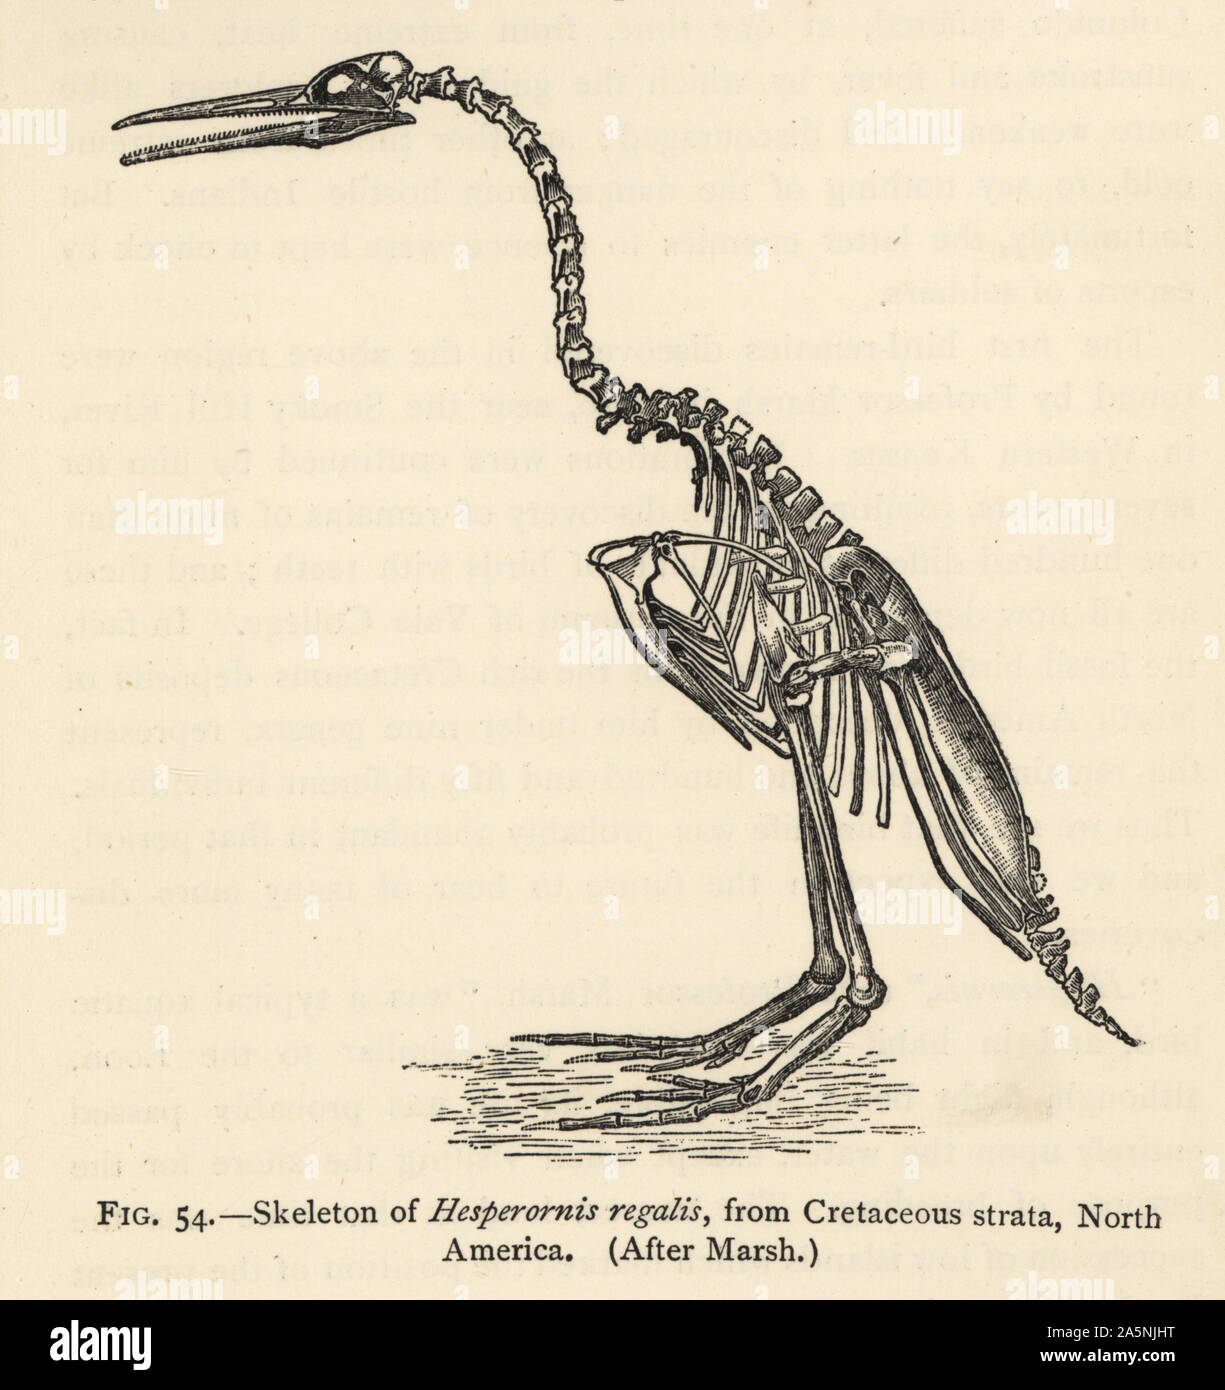 Skeleton of Hesperornis regalis, from Cretaceous strata, North America. After Othniel Charles Marsh. Engraving from Henry Neville Hutchinson’s Creatures of Other Days, Popular Studies in Palaeontology, Chapman and Hall, London, 1896. Stock Photo